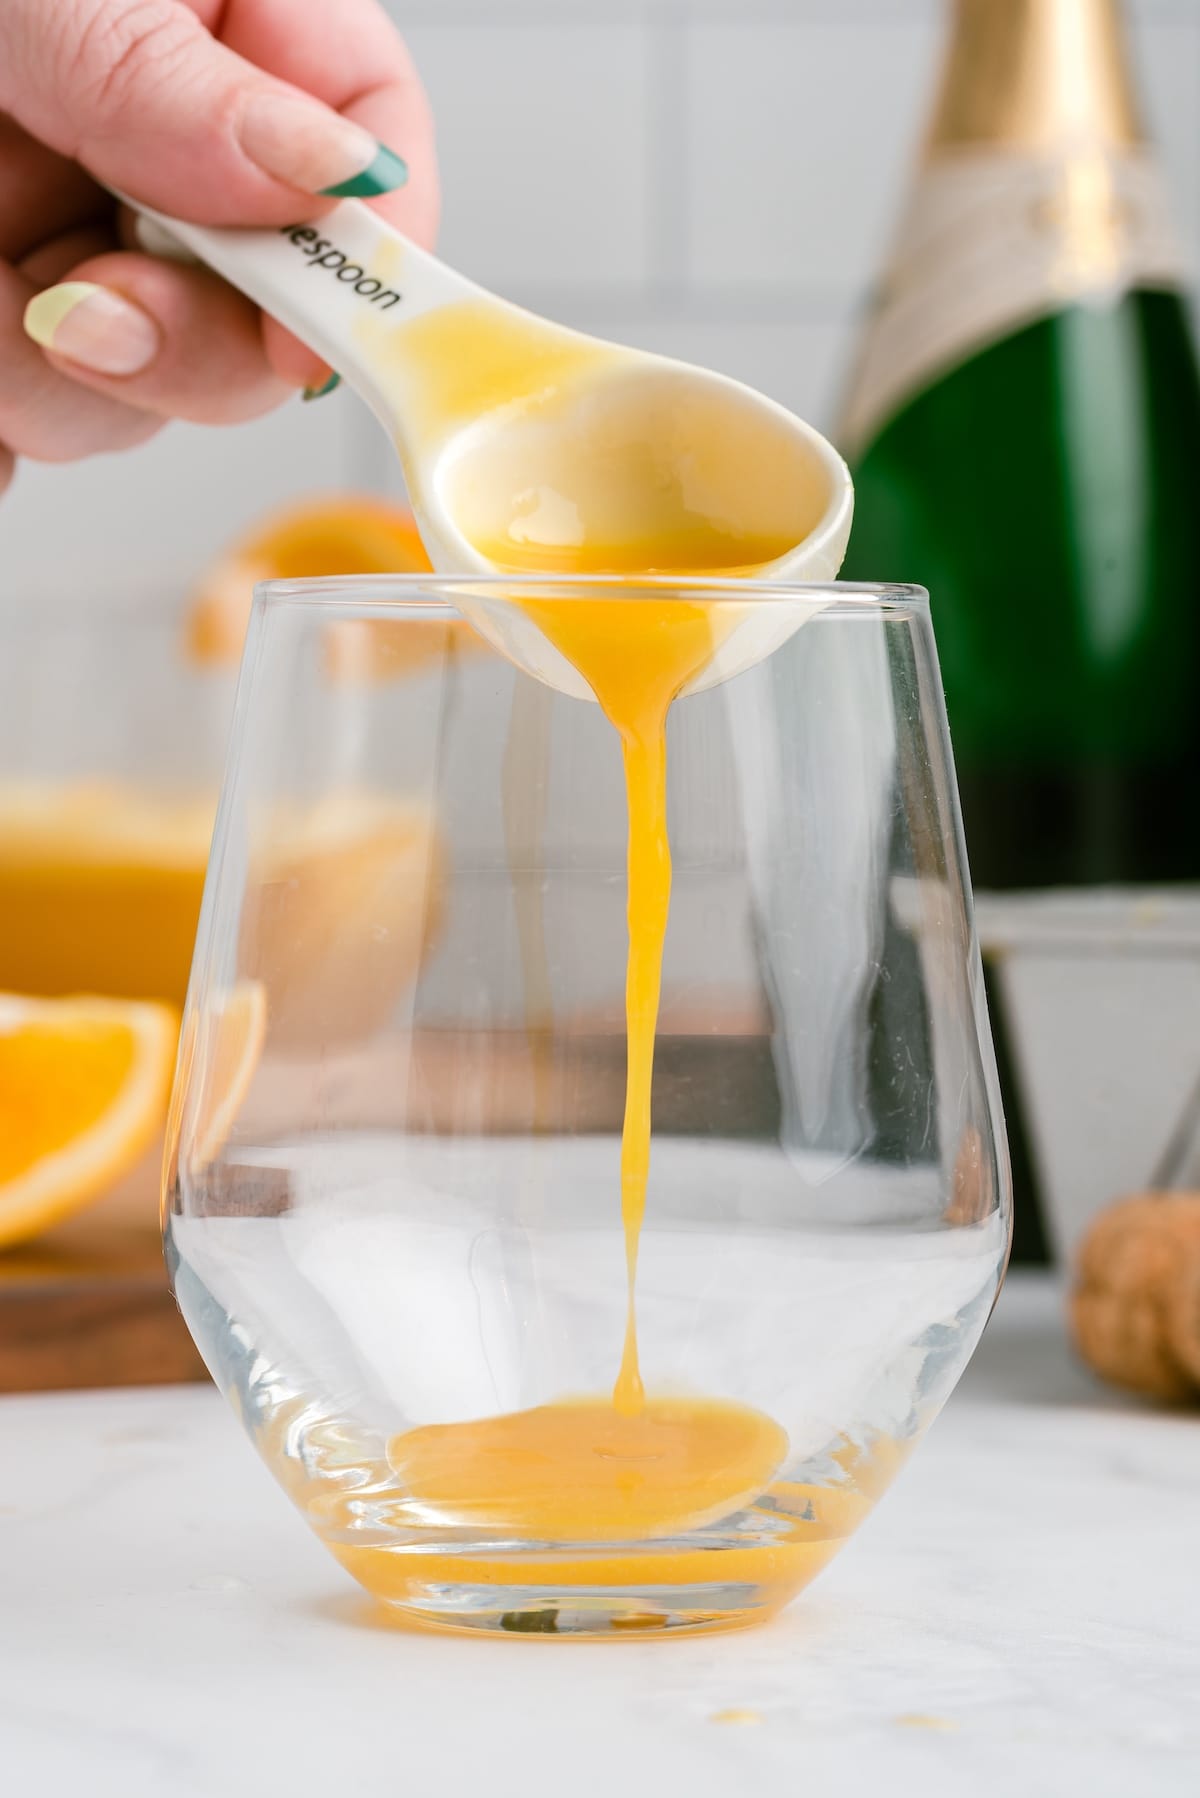 Add orange juice concentrate into the glass